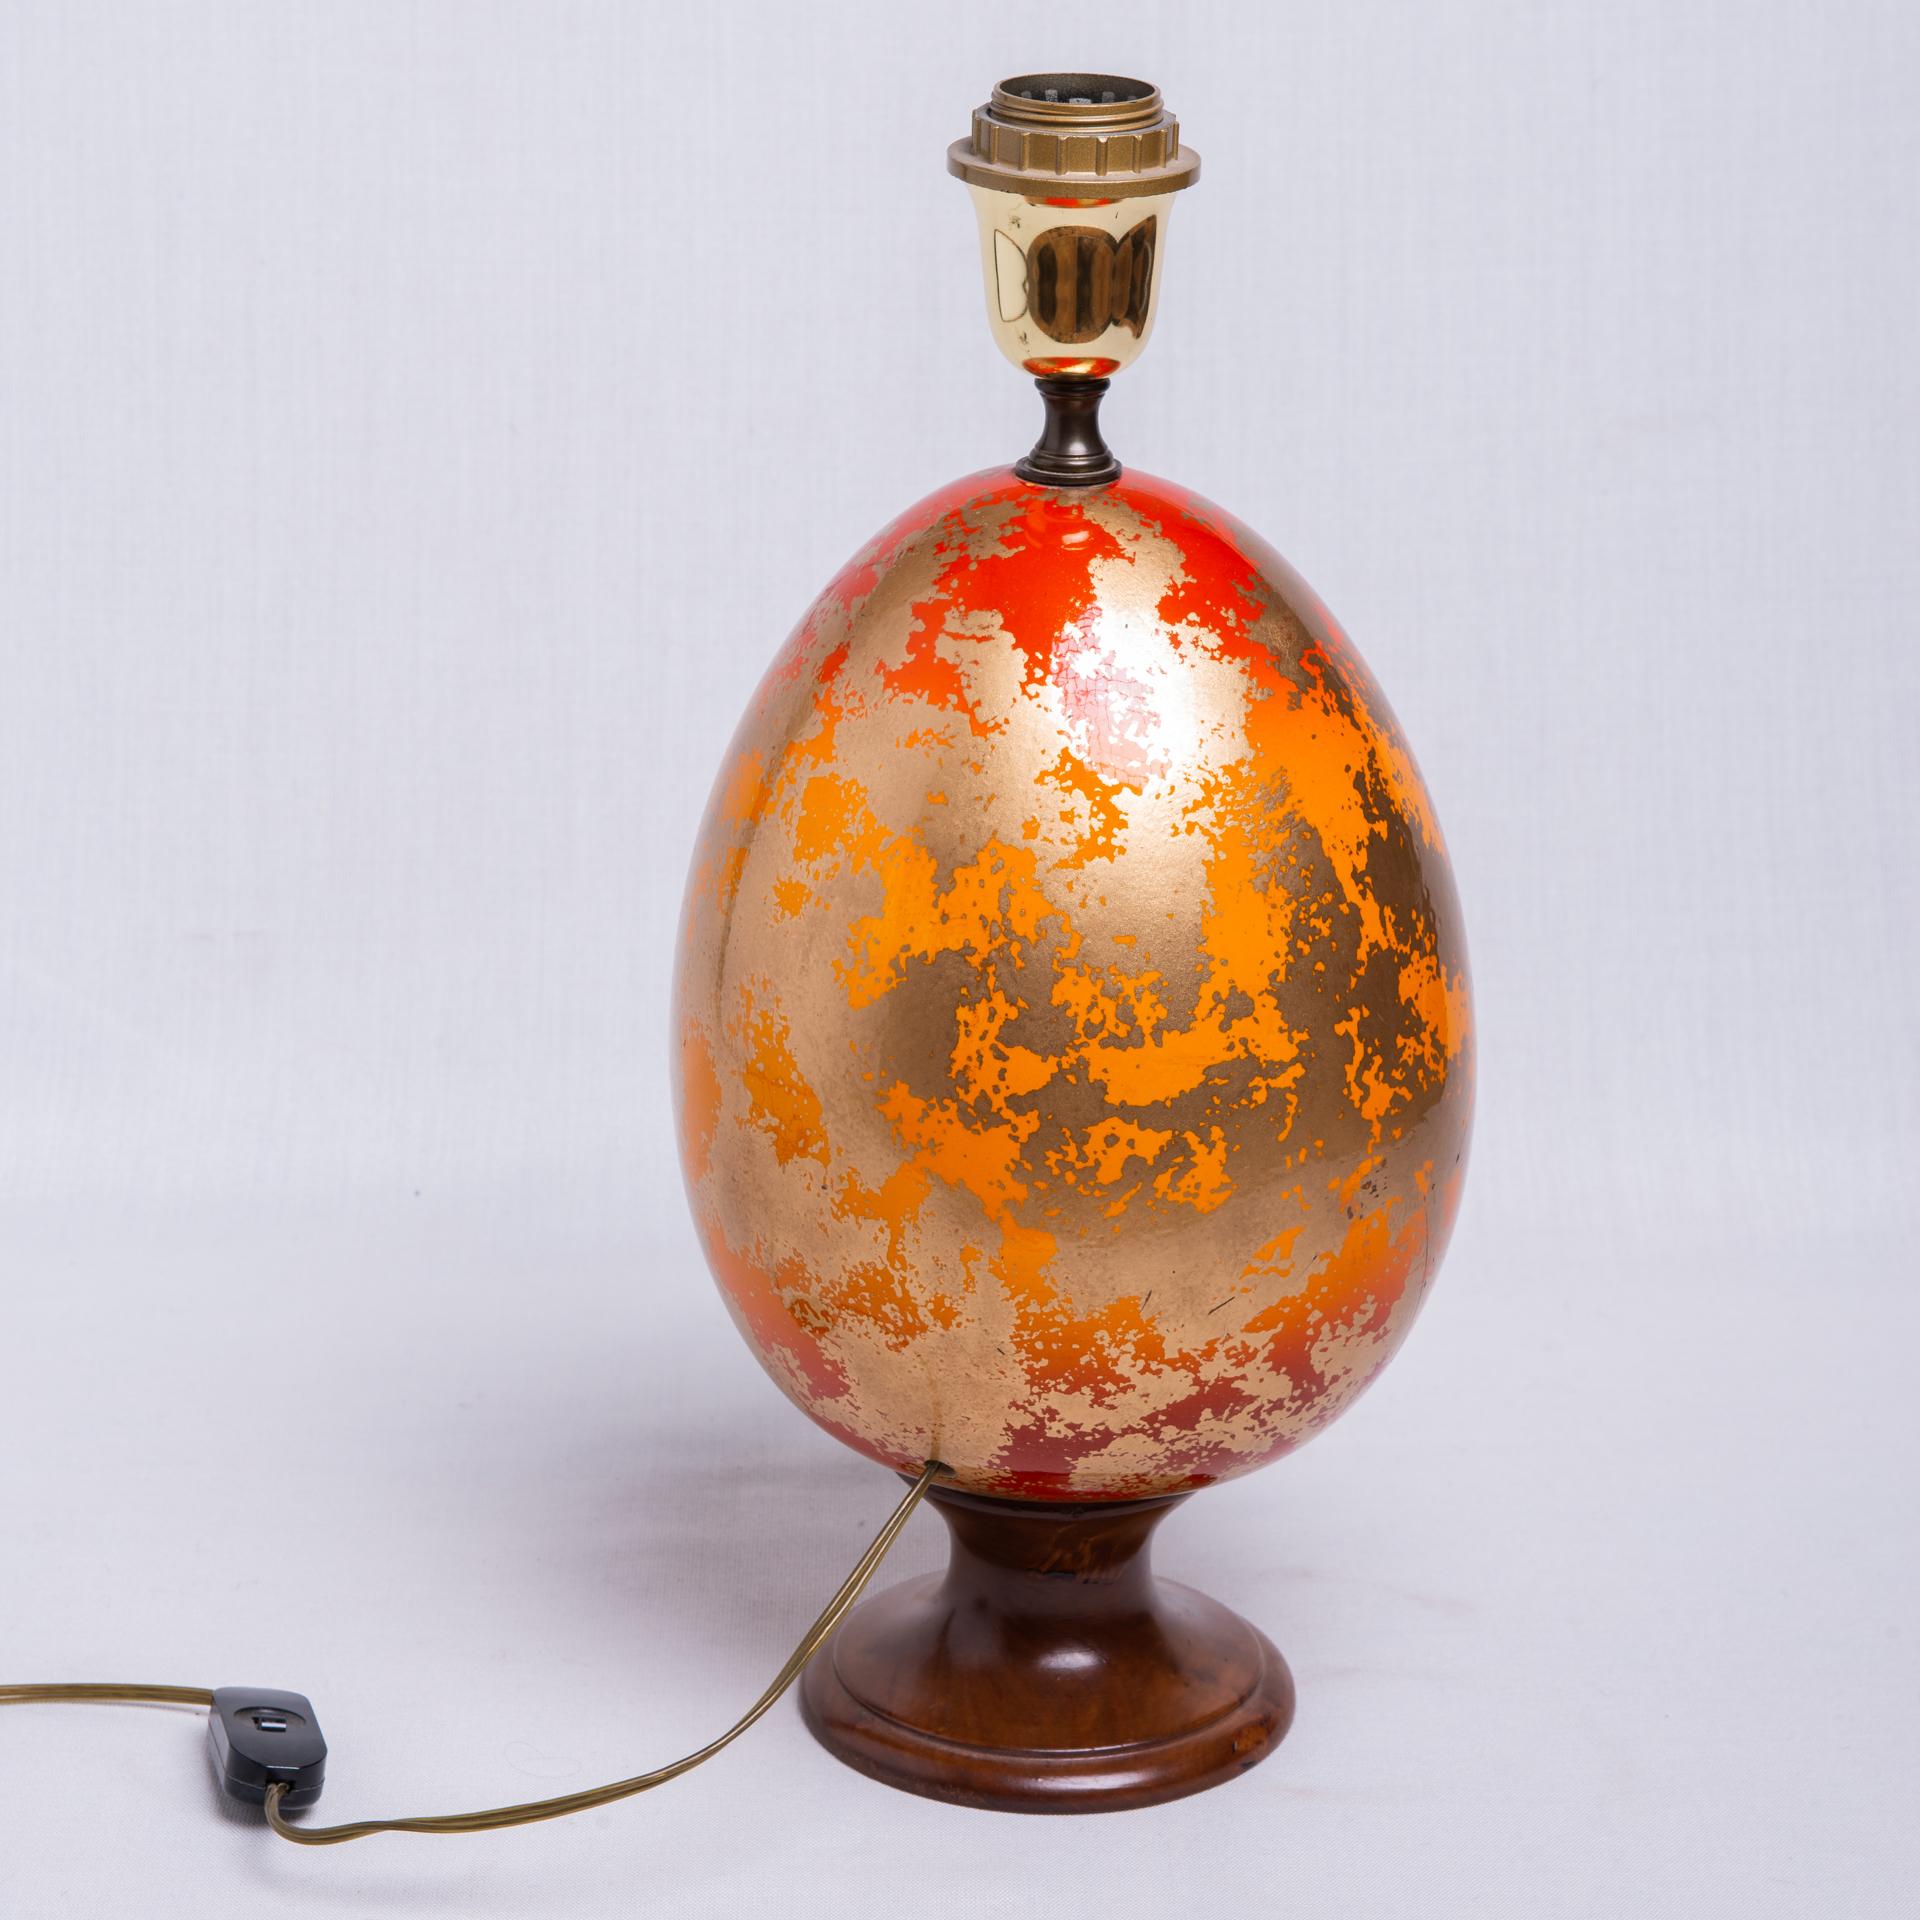 A special table lamp formed by an egg in unbreakable material (may be rubber, I don't remember name), mounted on a wooden base. Material consisting of polychrome colors. I mounted that strange egg on a wooden base in order to obtain an unusual 